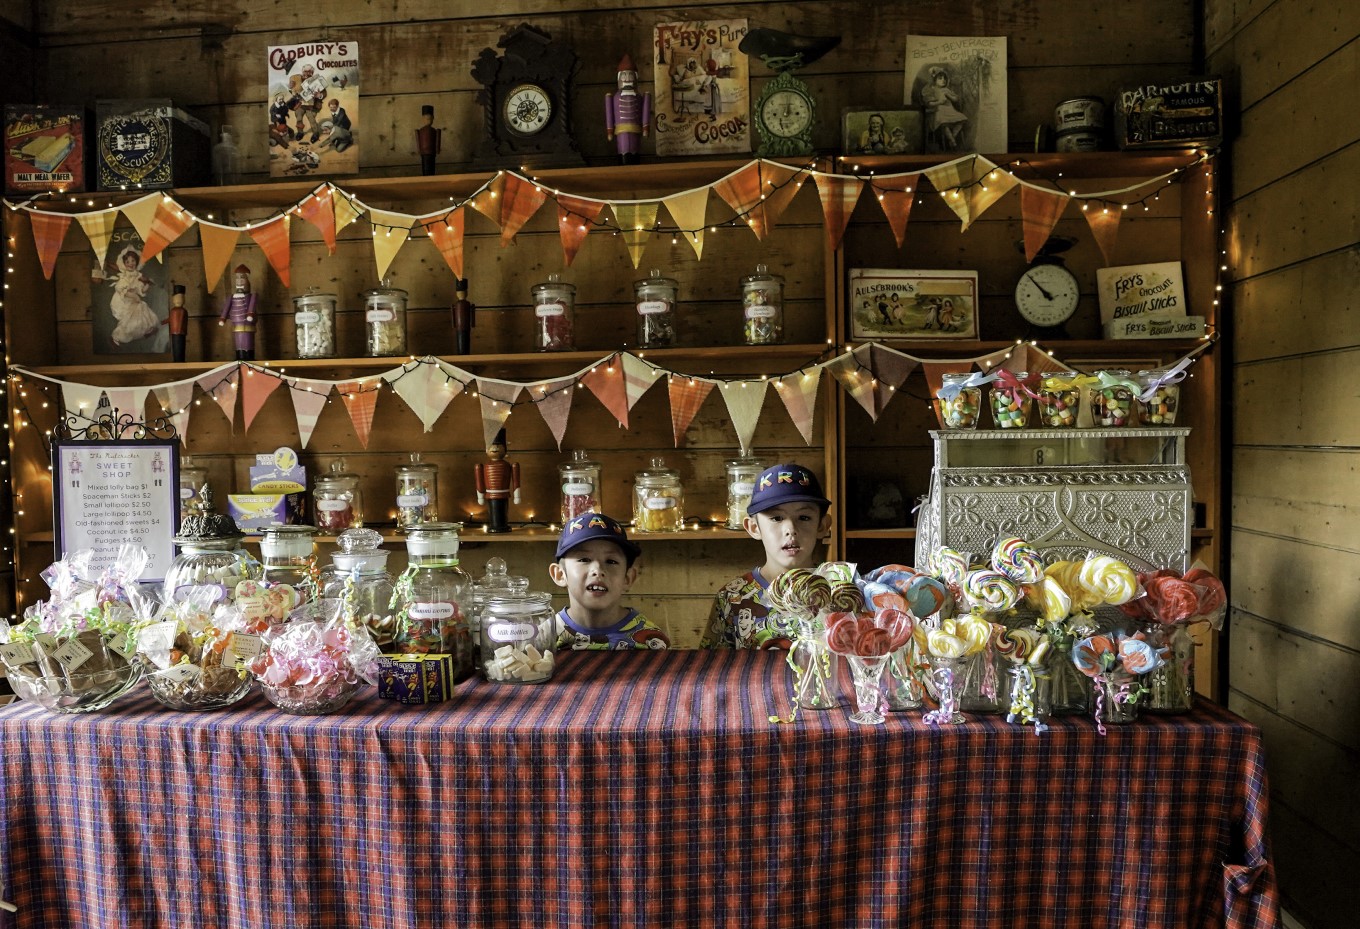 No treat day is complete without sweets! Your trip back in time at Howick Historical Village isn’t complete until you’ve perused the selection of old-fashioned lollies at the sweet shop.